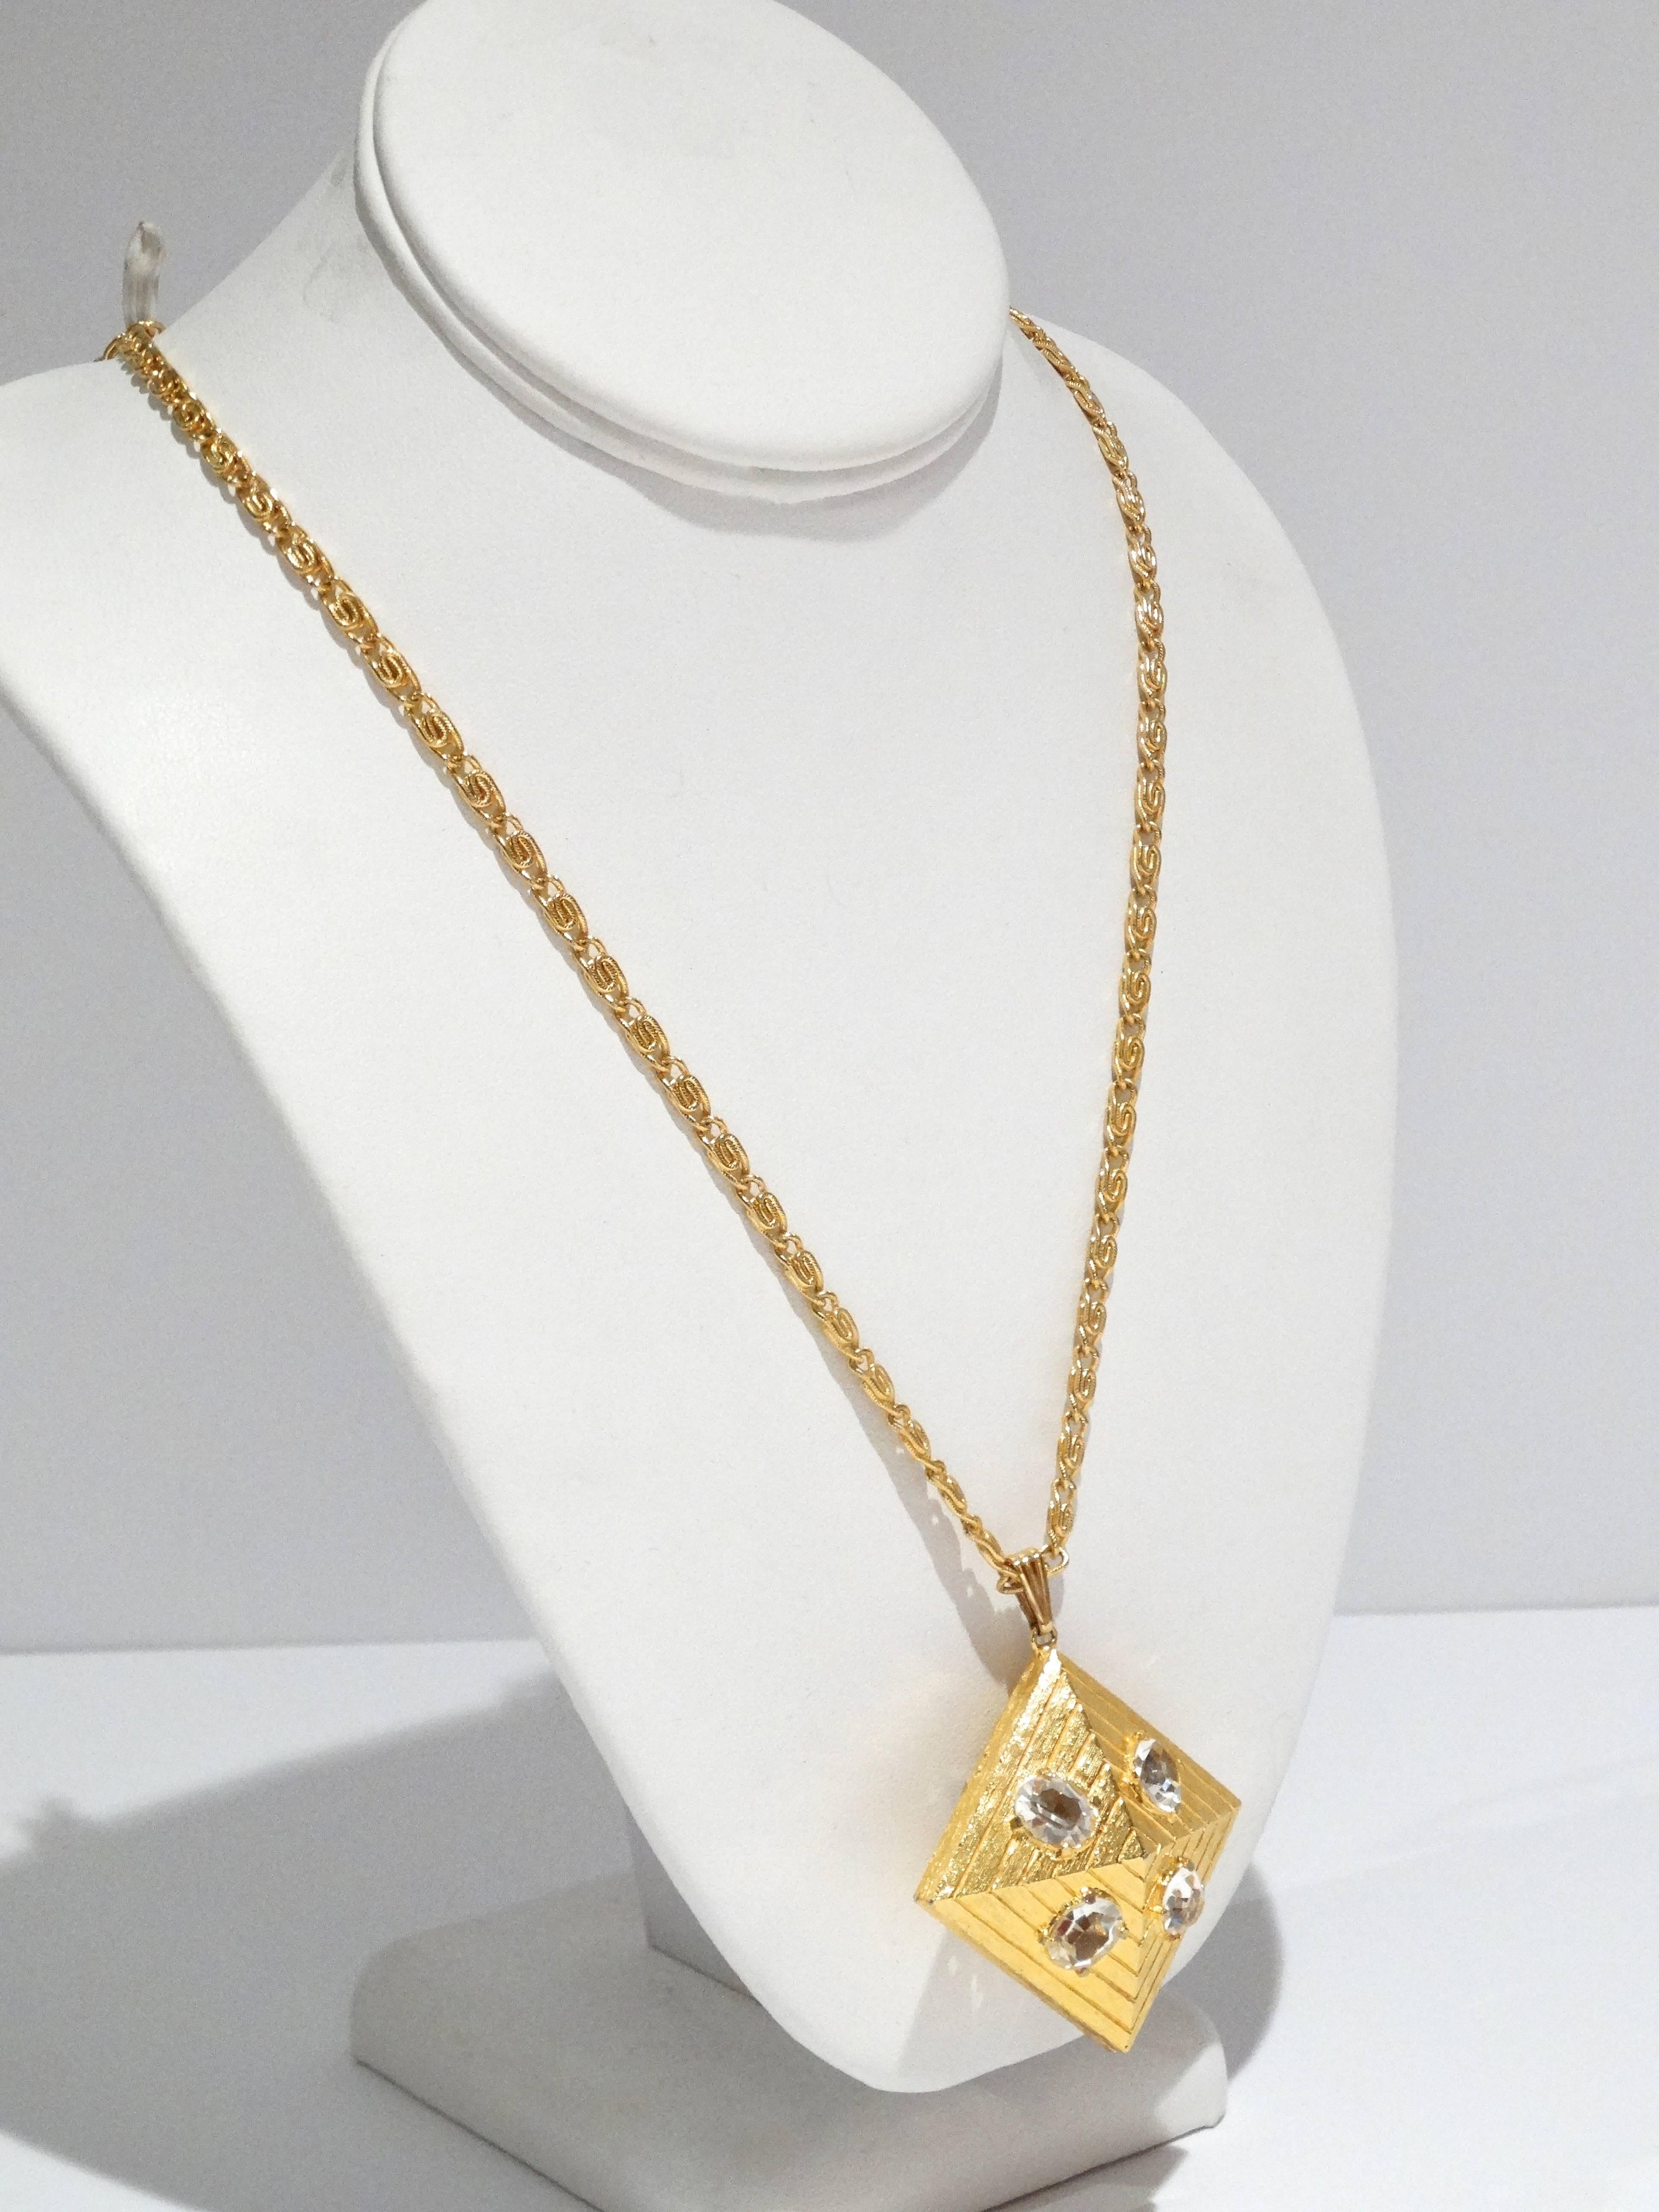 Rare 1970's item by William de Lillo. This is a beautiful gilt 3-D pendent necklace with crystal stone details on both sides of the pendent.  The necklace is 15